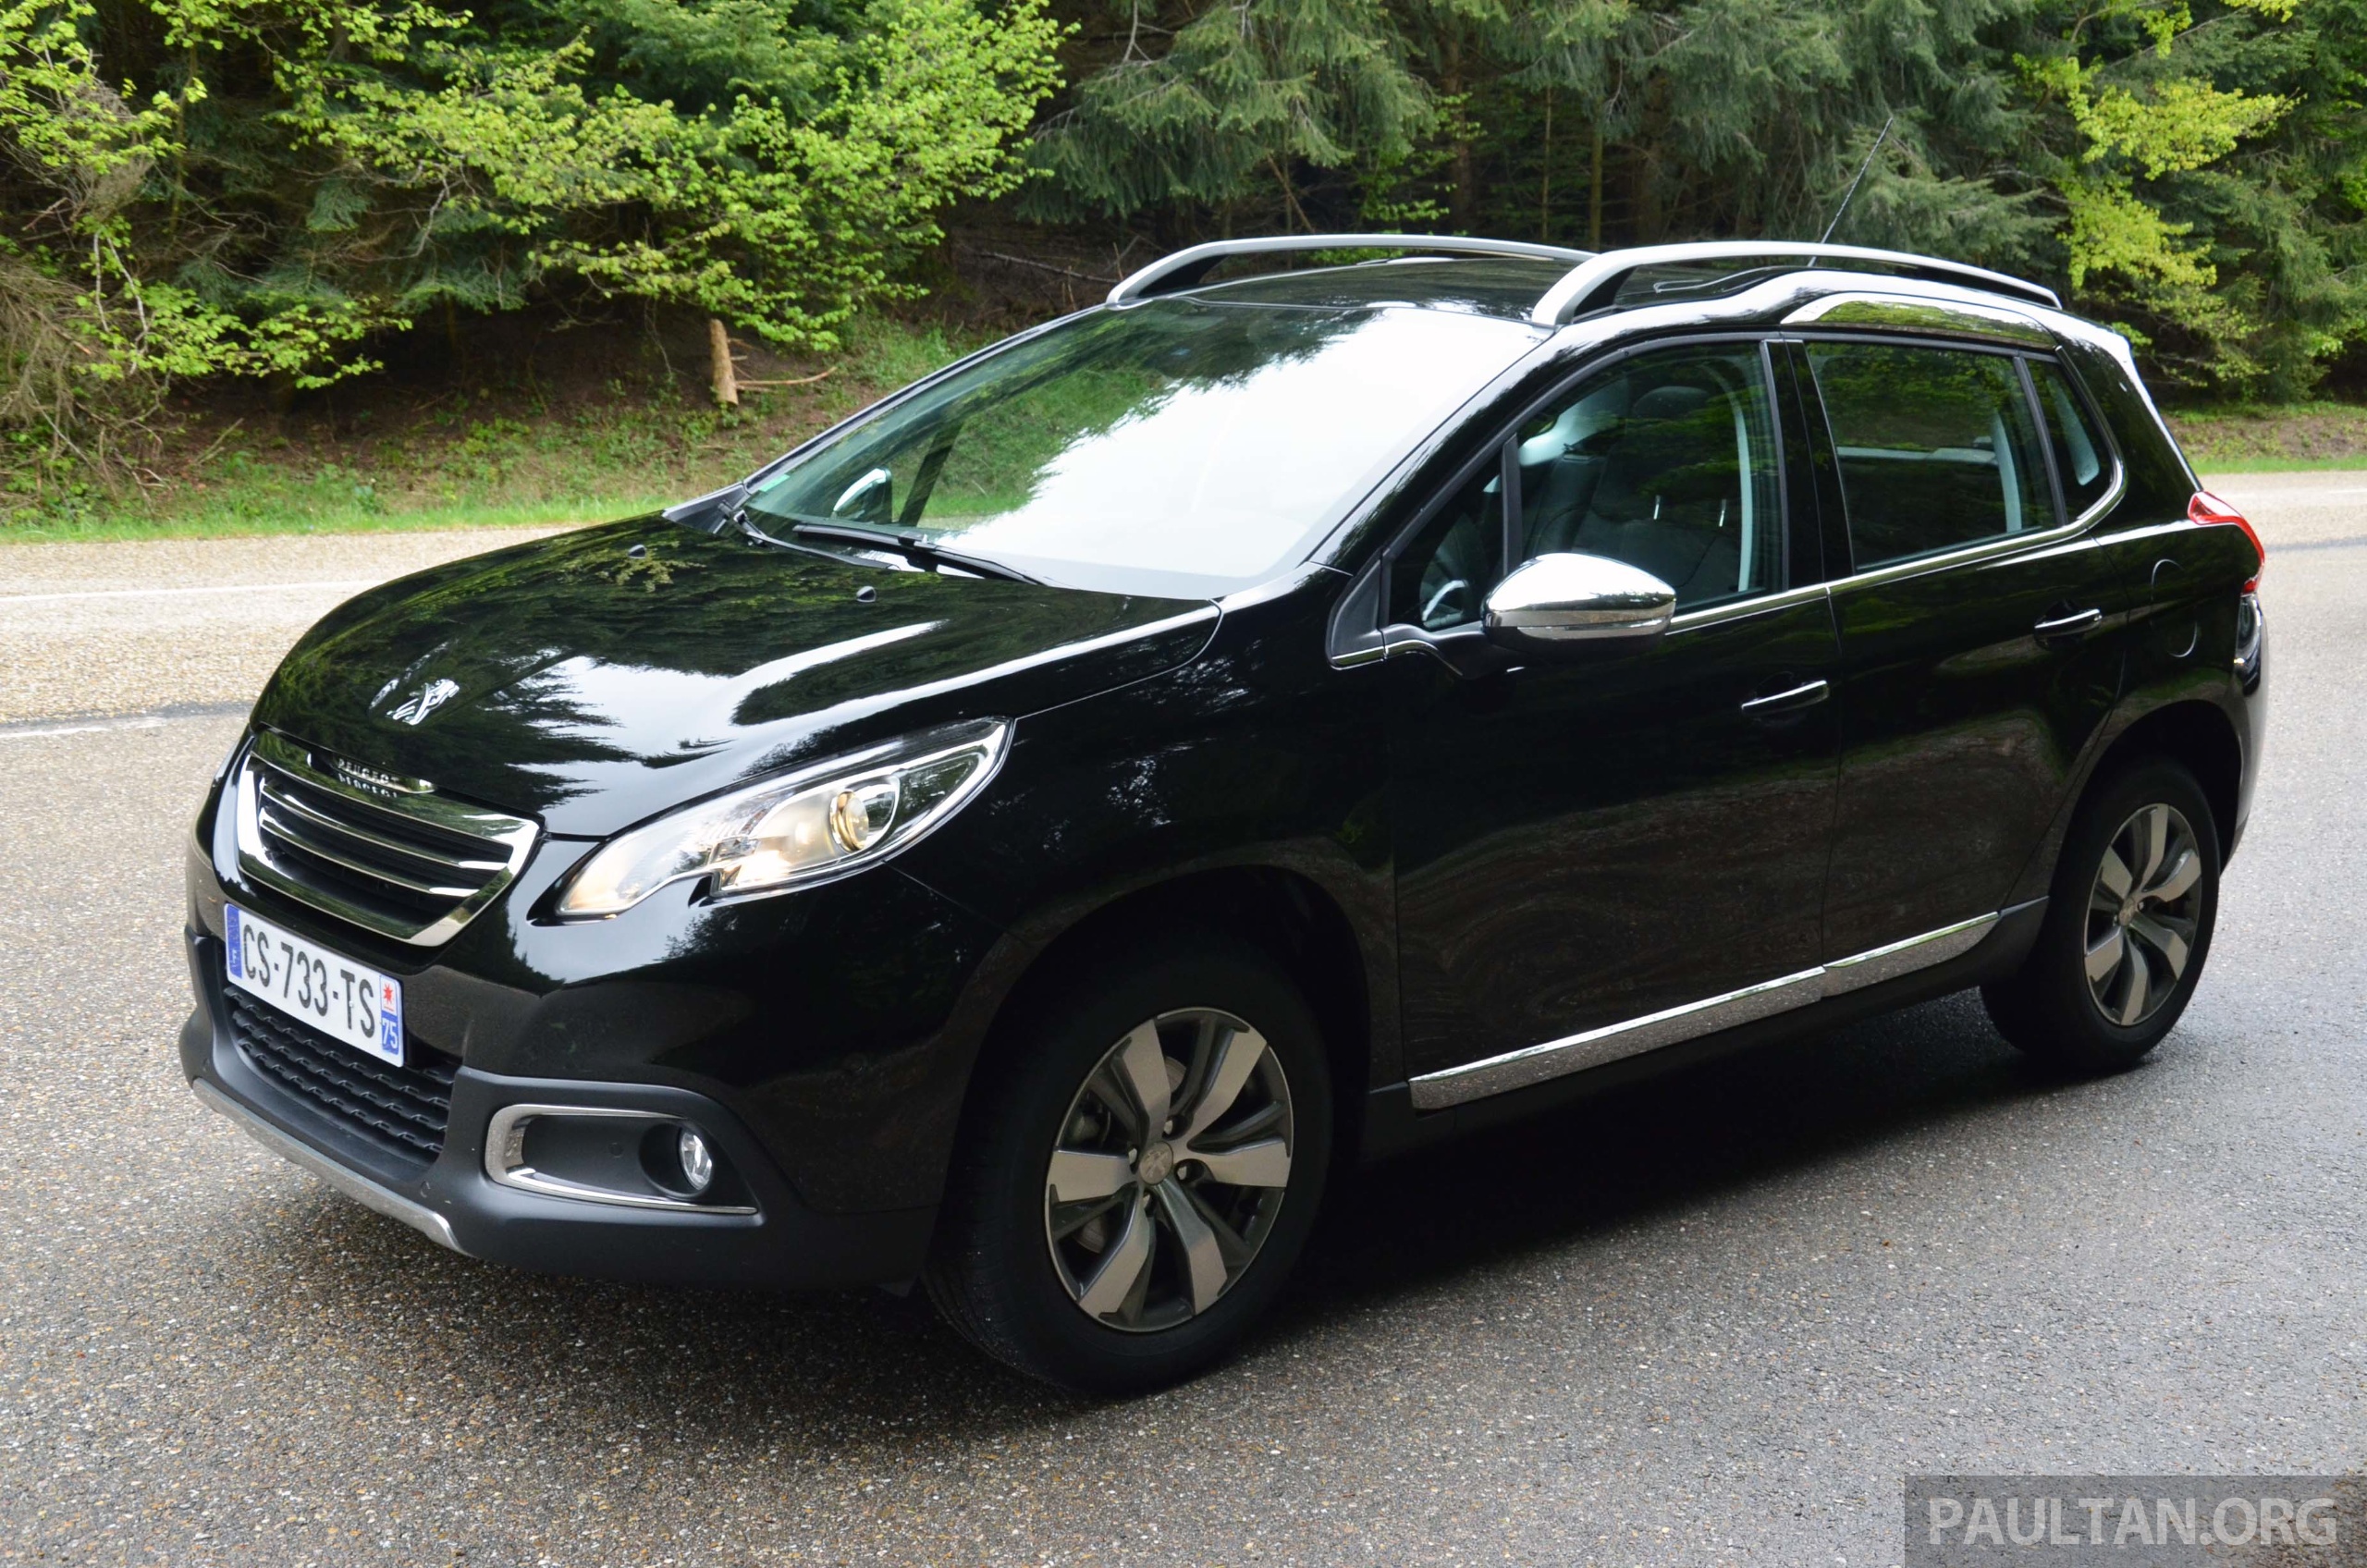 Back to Story: DRIVEN: Peugeot 2008 crossover in Alsace, France